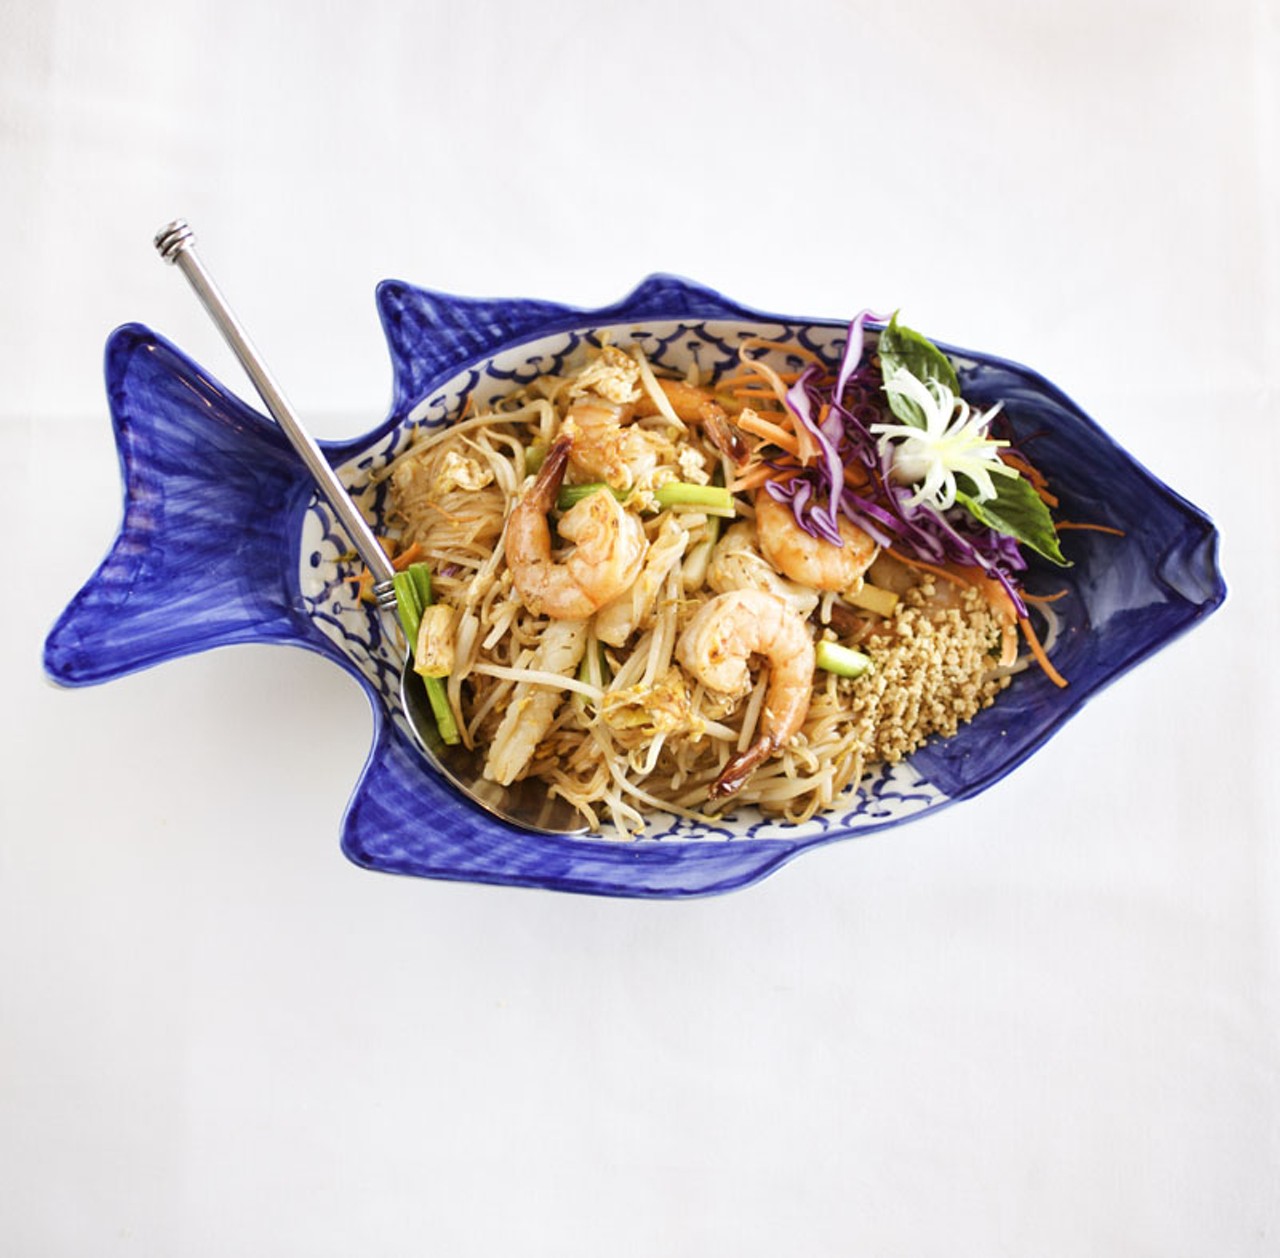 Addie's Thai House offers a Pad Thai Seafood which is prepared with fried, thin rice noodles with garlic, prawns, clamari, egg, tofu, green onions, carrots and bean sprouts. The dish is then topped with ground peanuts and a slightly sweet sauce.